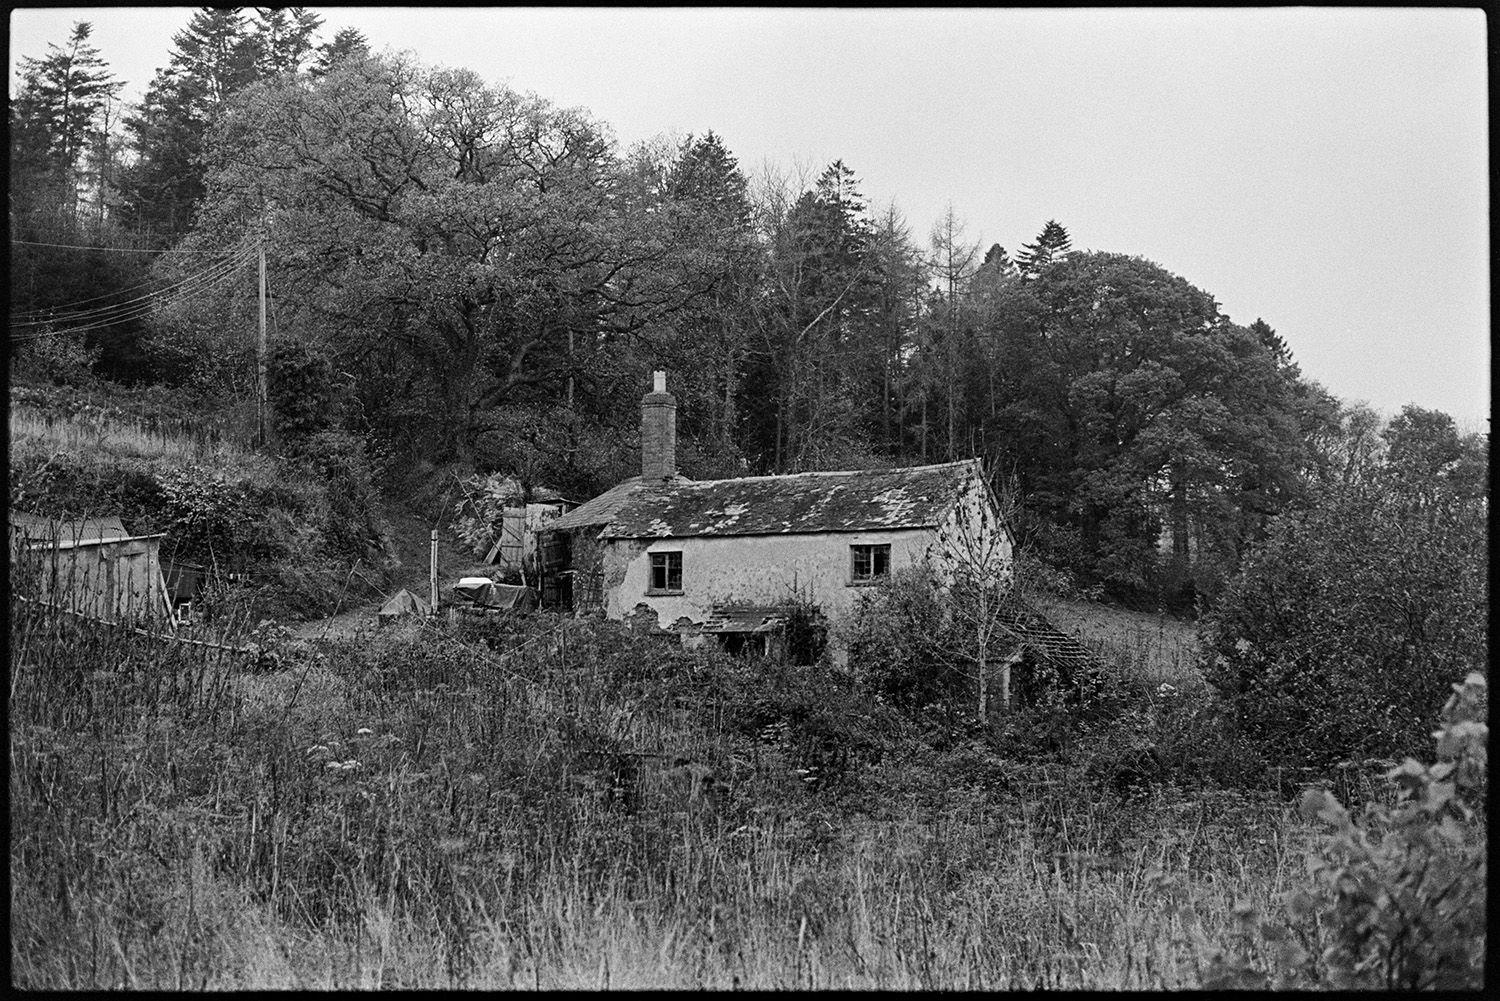 Small slated cob cottage, now demolished. 
[A small cob cottage with a slate roof and large chimney at Newbridge, Dolton. Trees and foliage surround the cottage. The cottage was later demolished.]